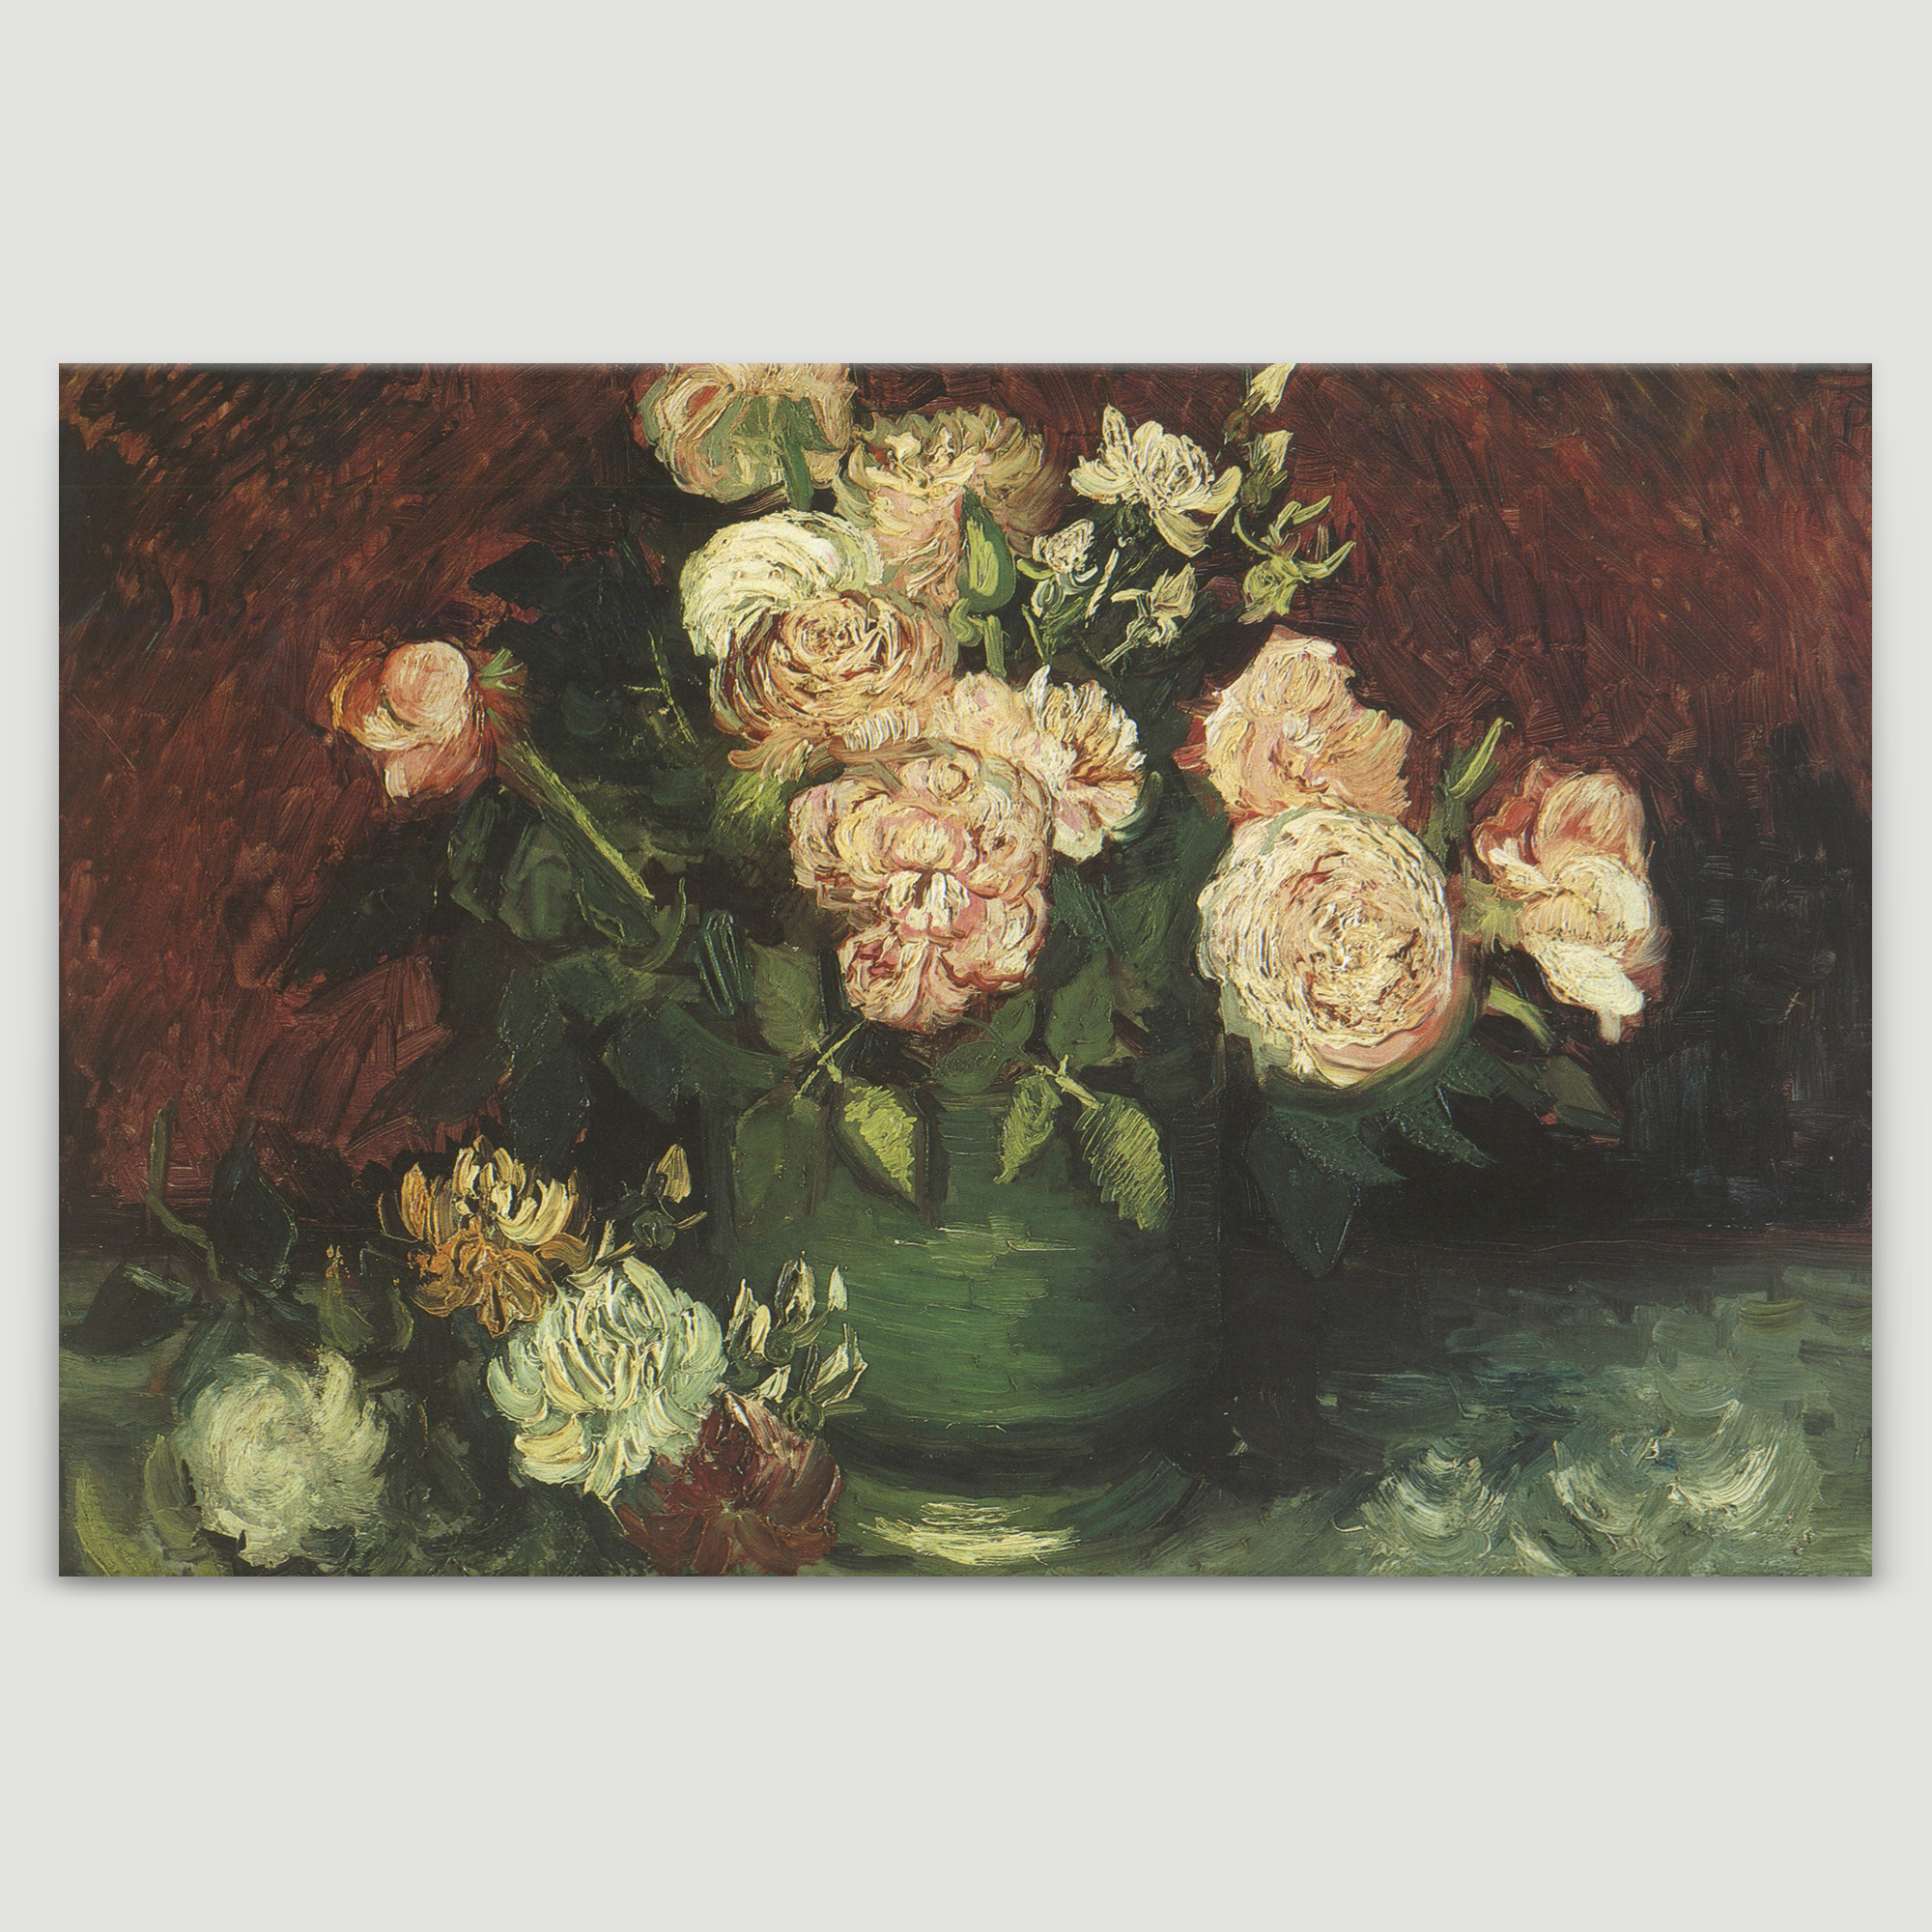 Bowl with Peonies and Roses by Vincent Van Gogh - Oil Painting Reproduction on Canvas Prints Wall Art, Ready to Hang - 32